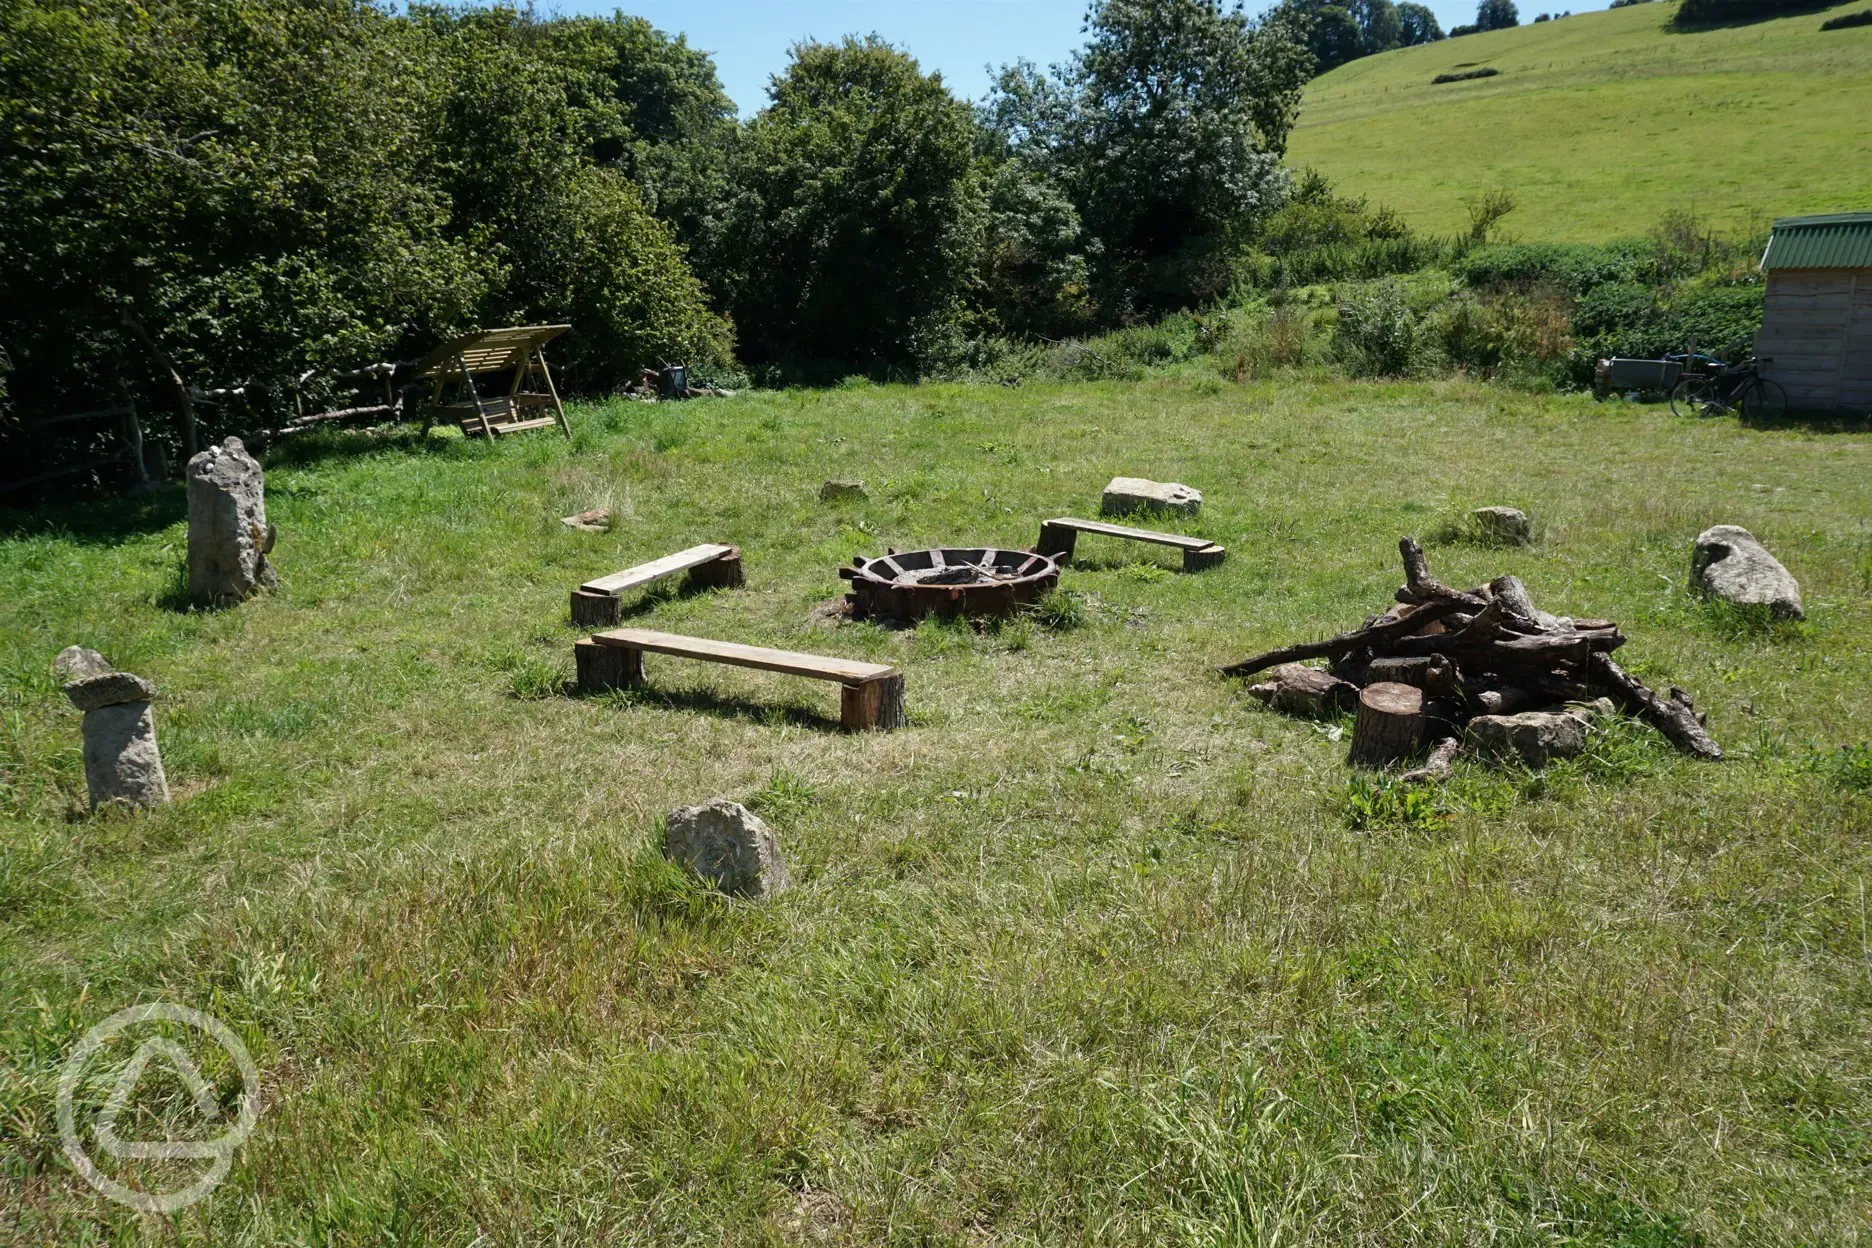 Main fire pit and stone circle